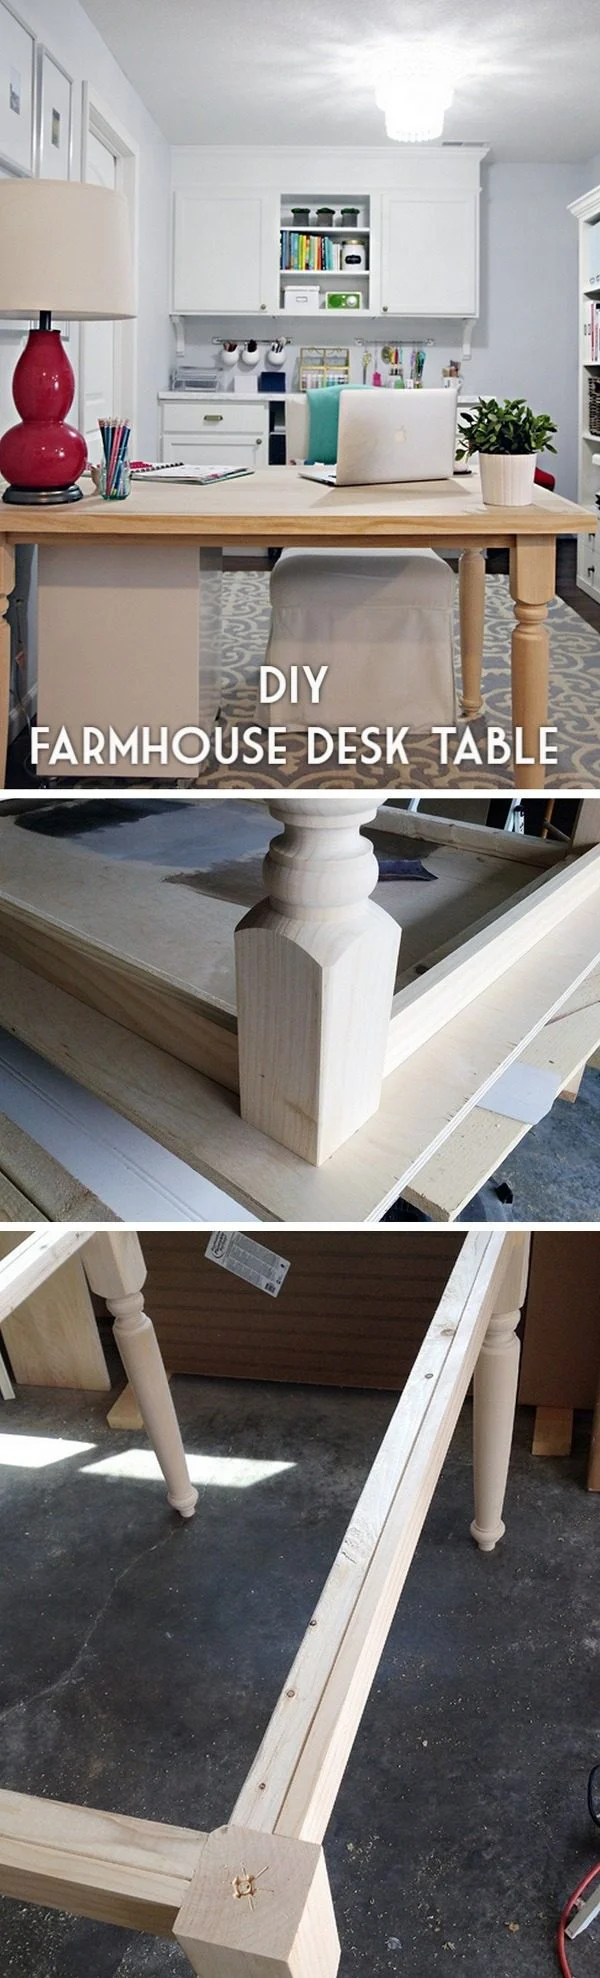 Check out the tutorial how to build a   desk table   